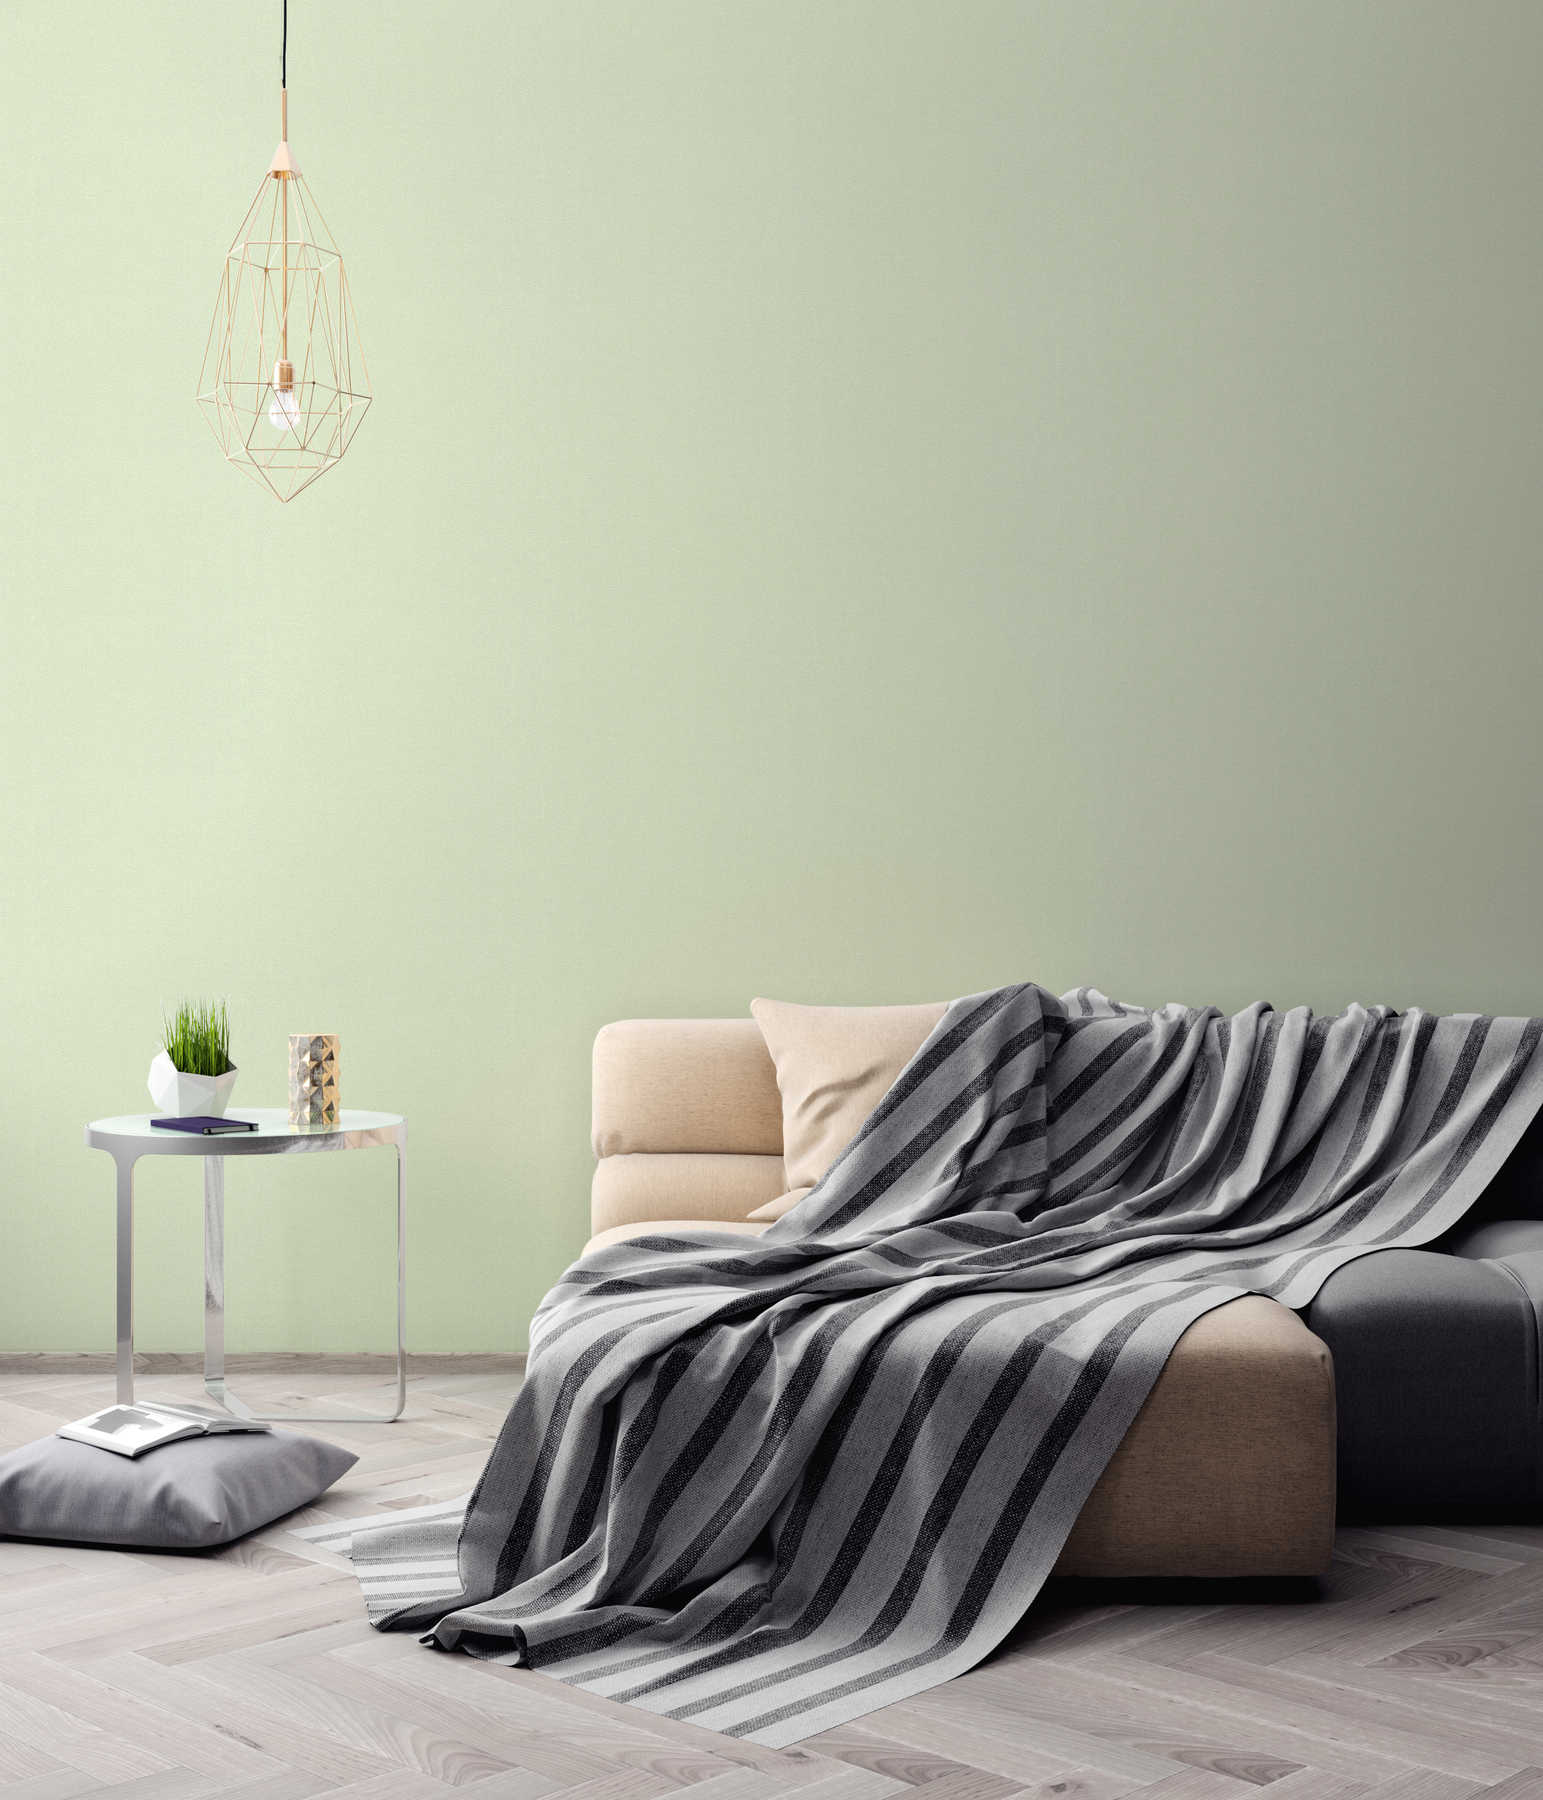             Pastel wallpaper light green with structure embossed pattern
        